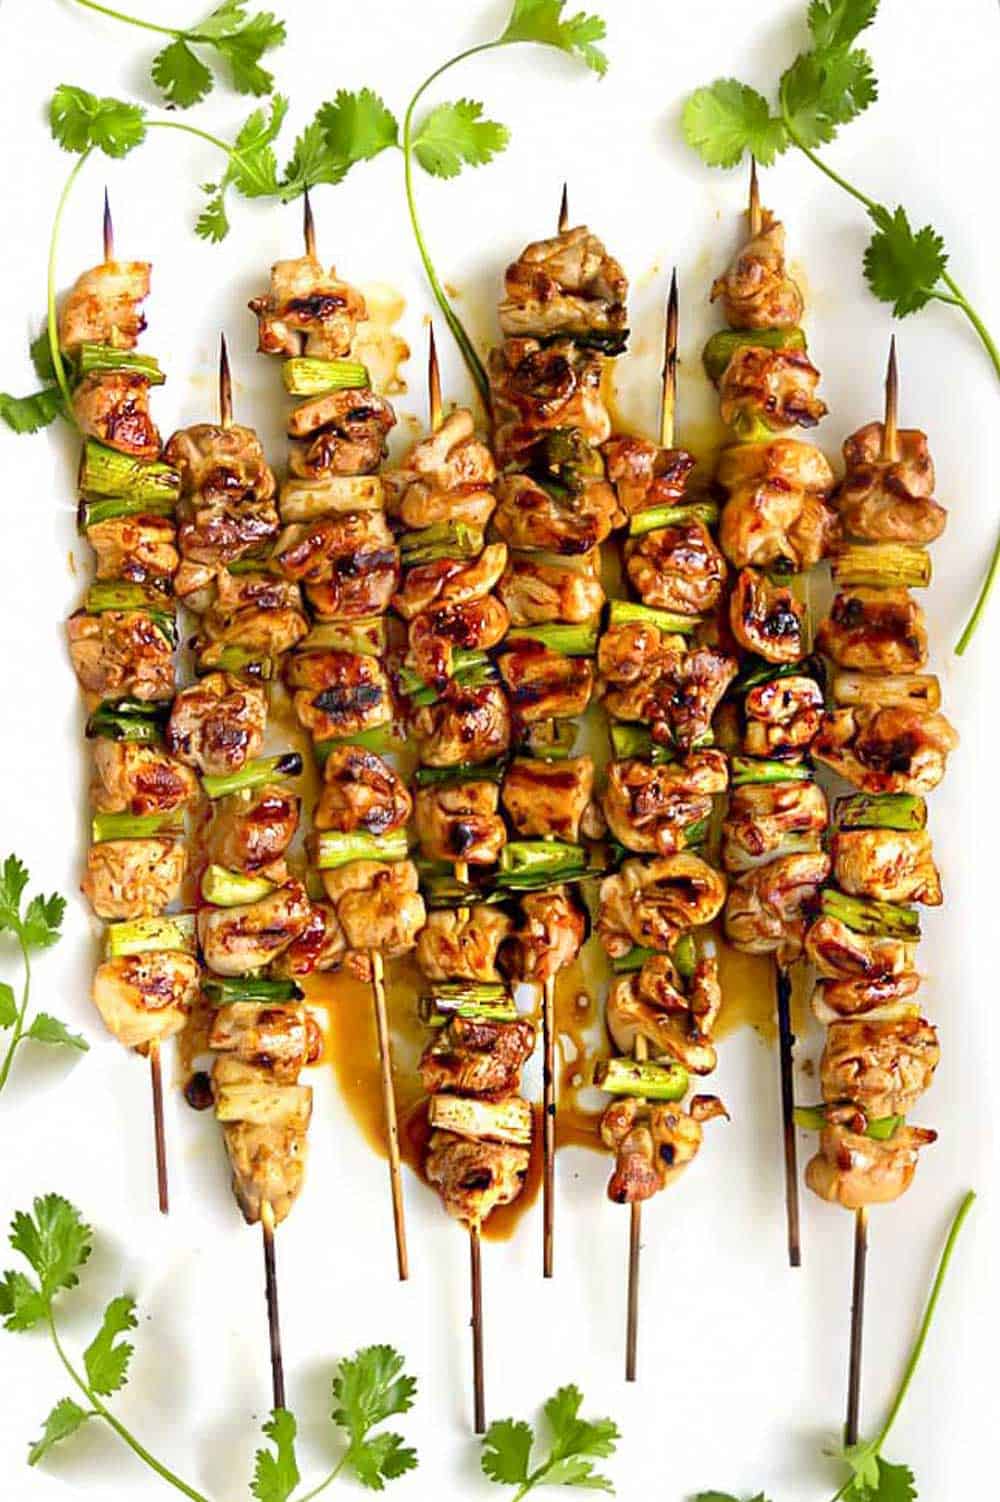 8 skewers of yakitori chicken with scallions, and sprigs of cilantro decorating the edges